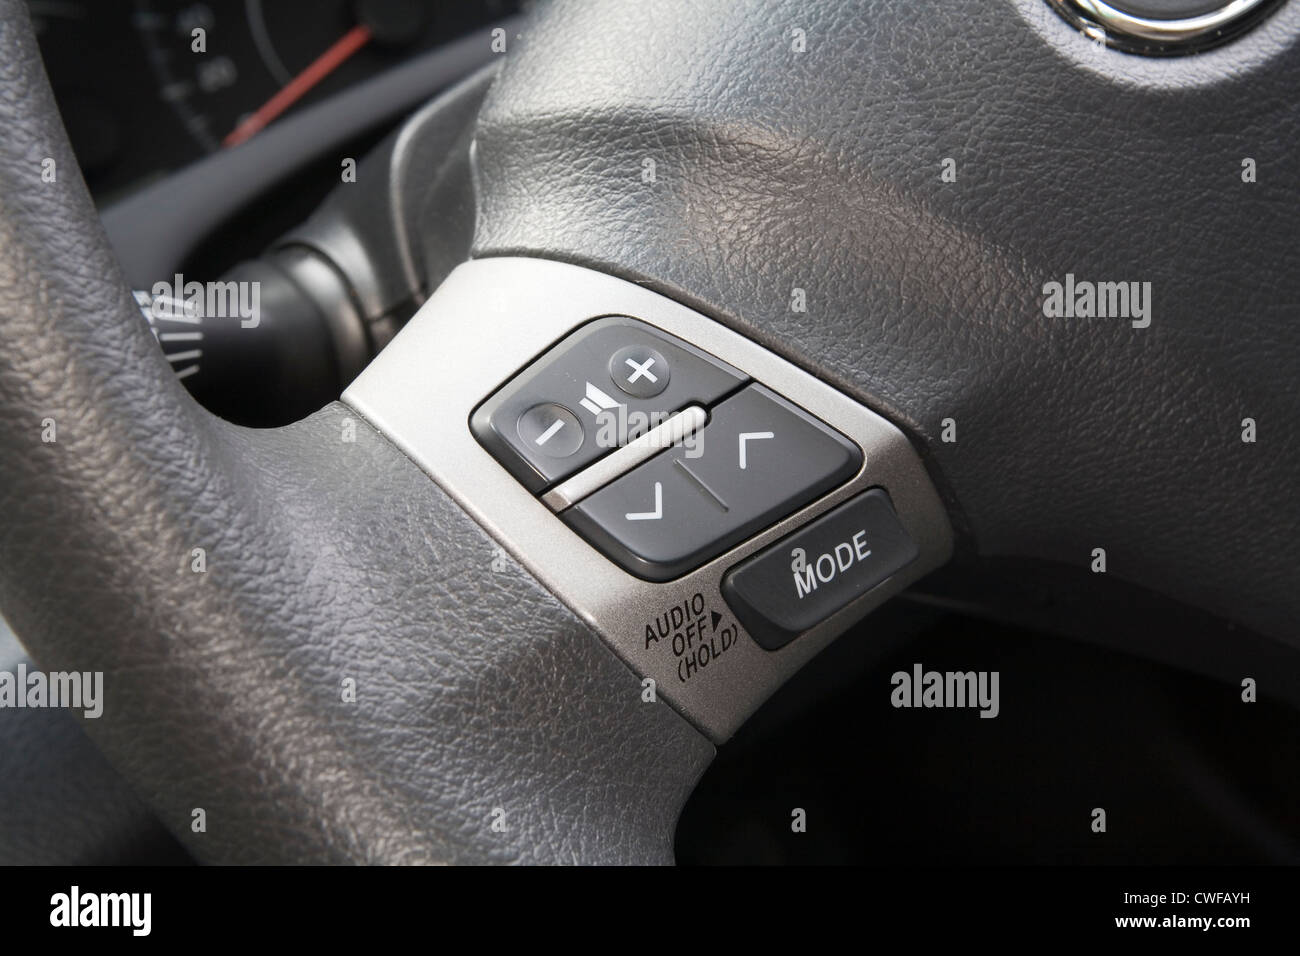 Car stereo audio control buttons on the steering wheel of a car. Stock Photo